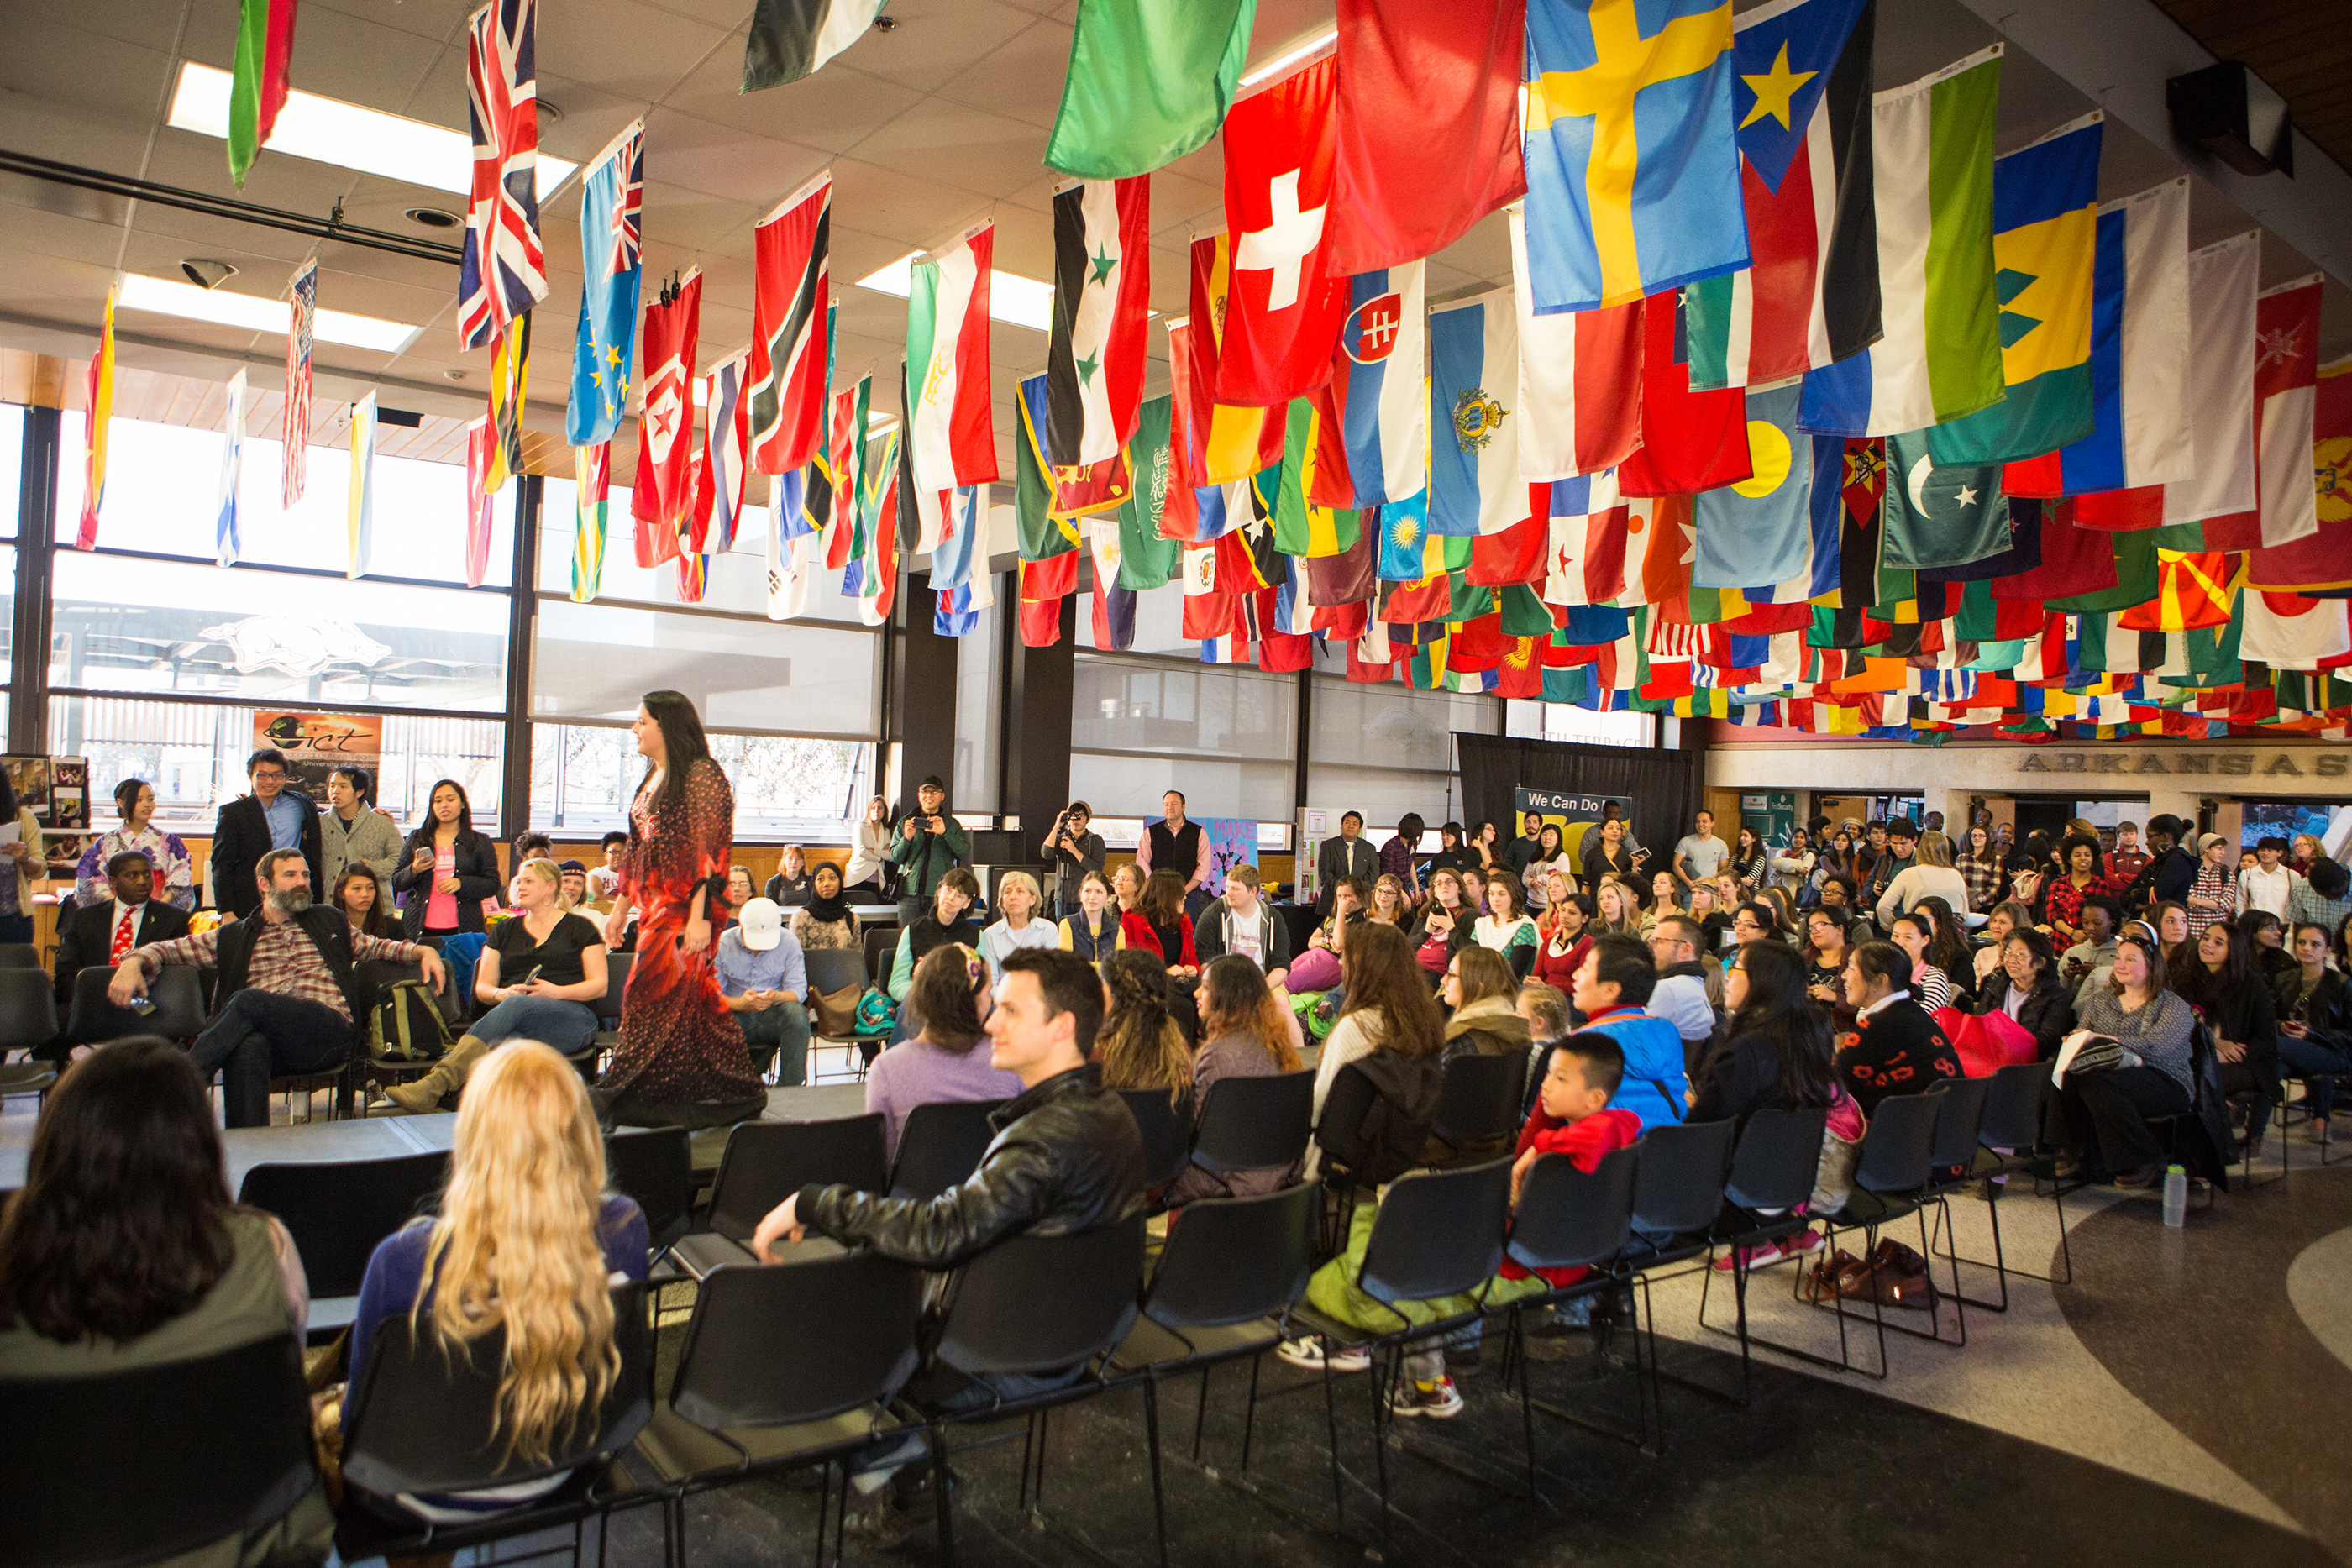 The University of Arkansas celebrated the role of women throughout the world.